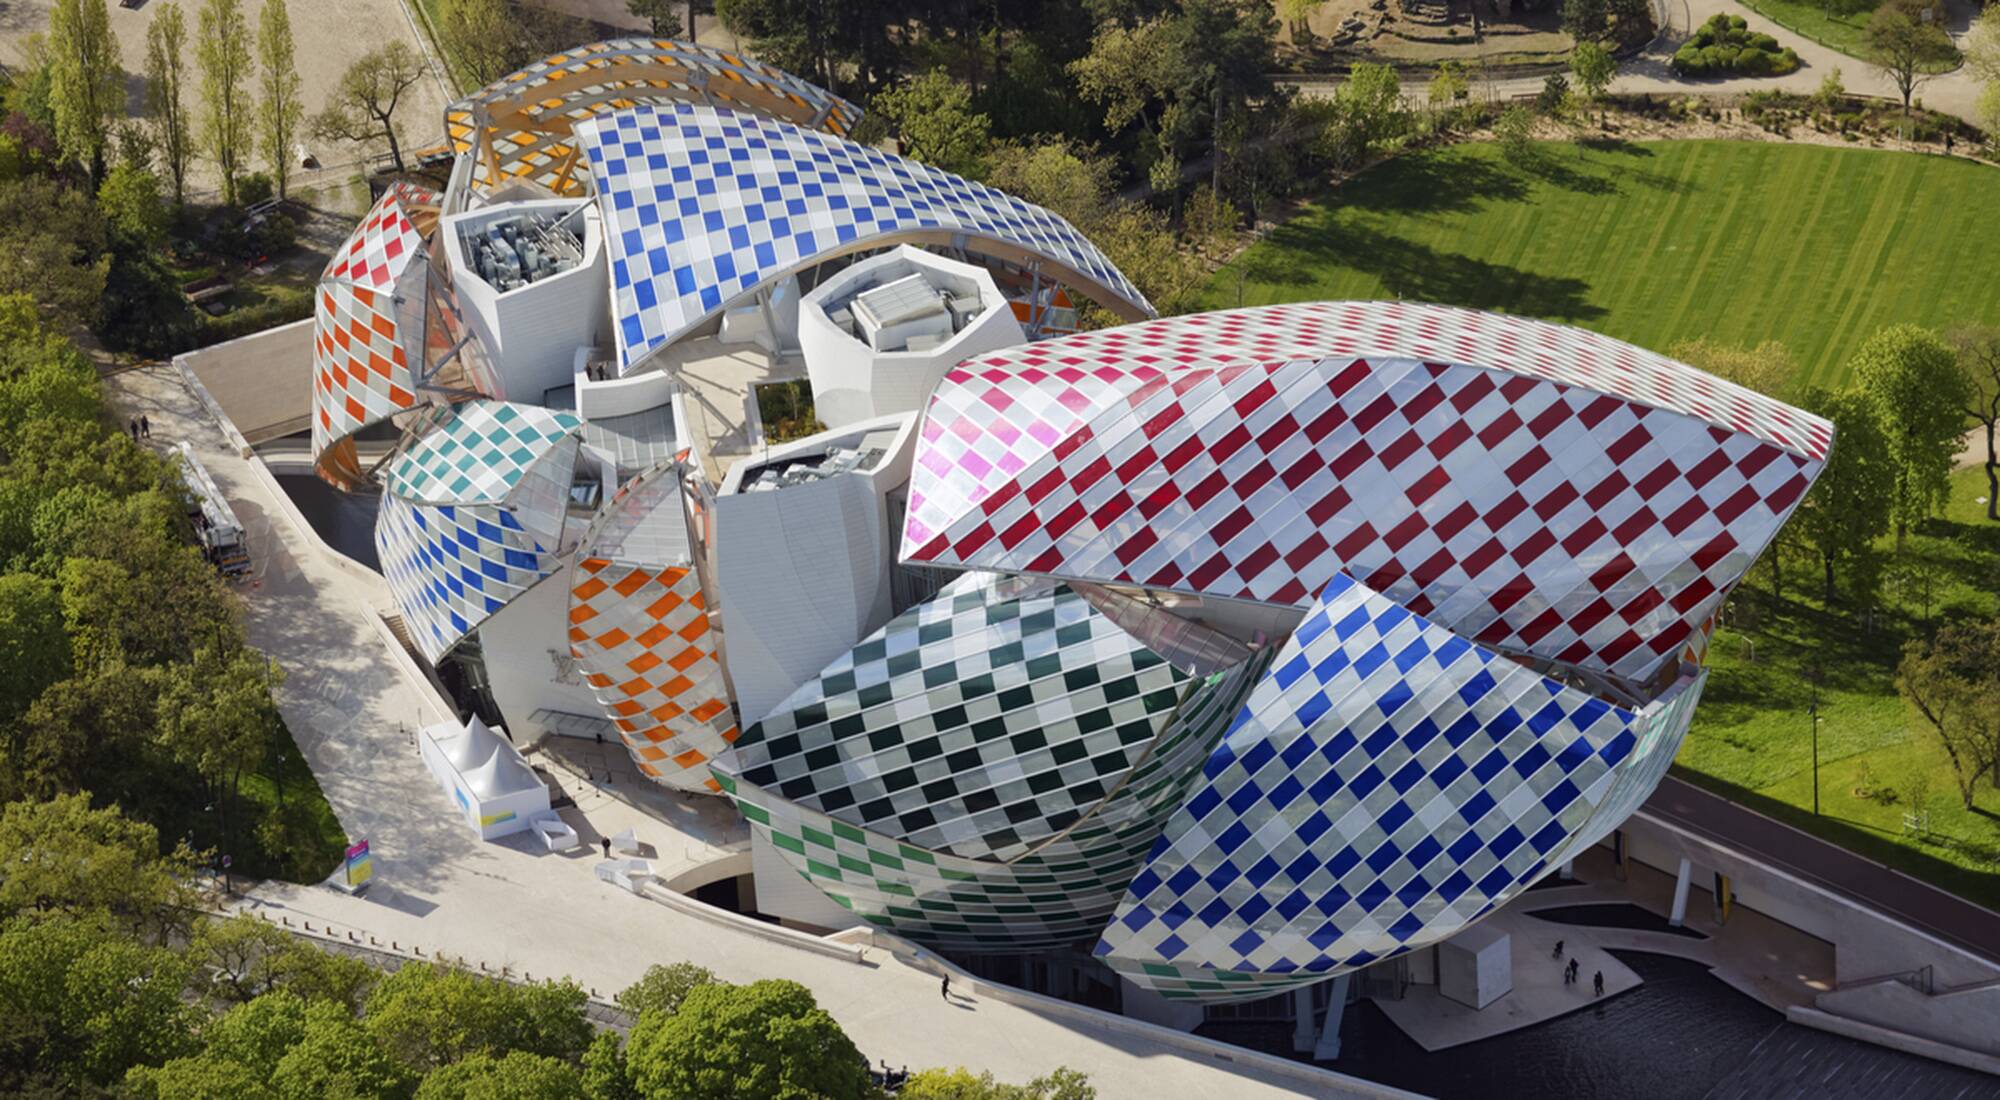 Fondation Louis Vuitton Designed by Frank Gehry